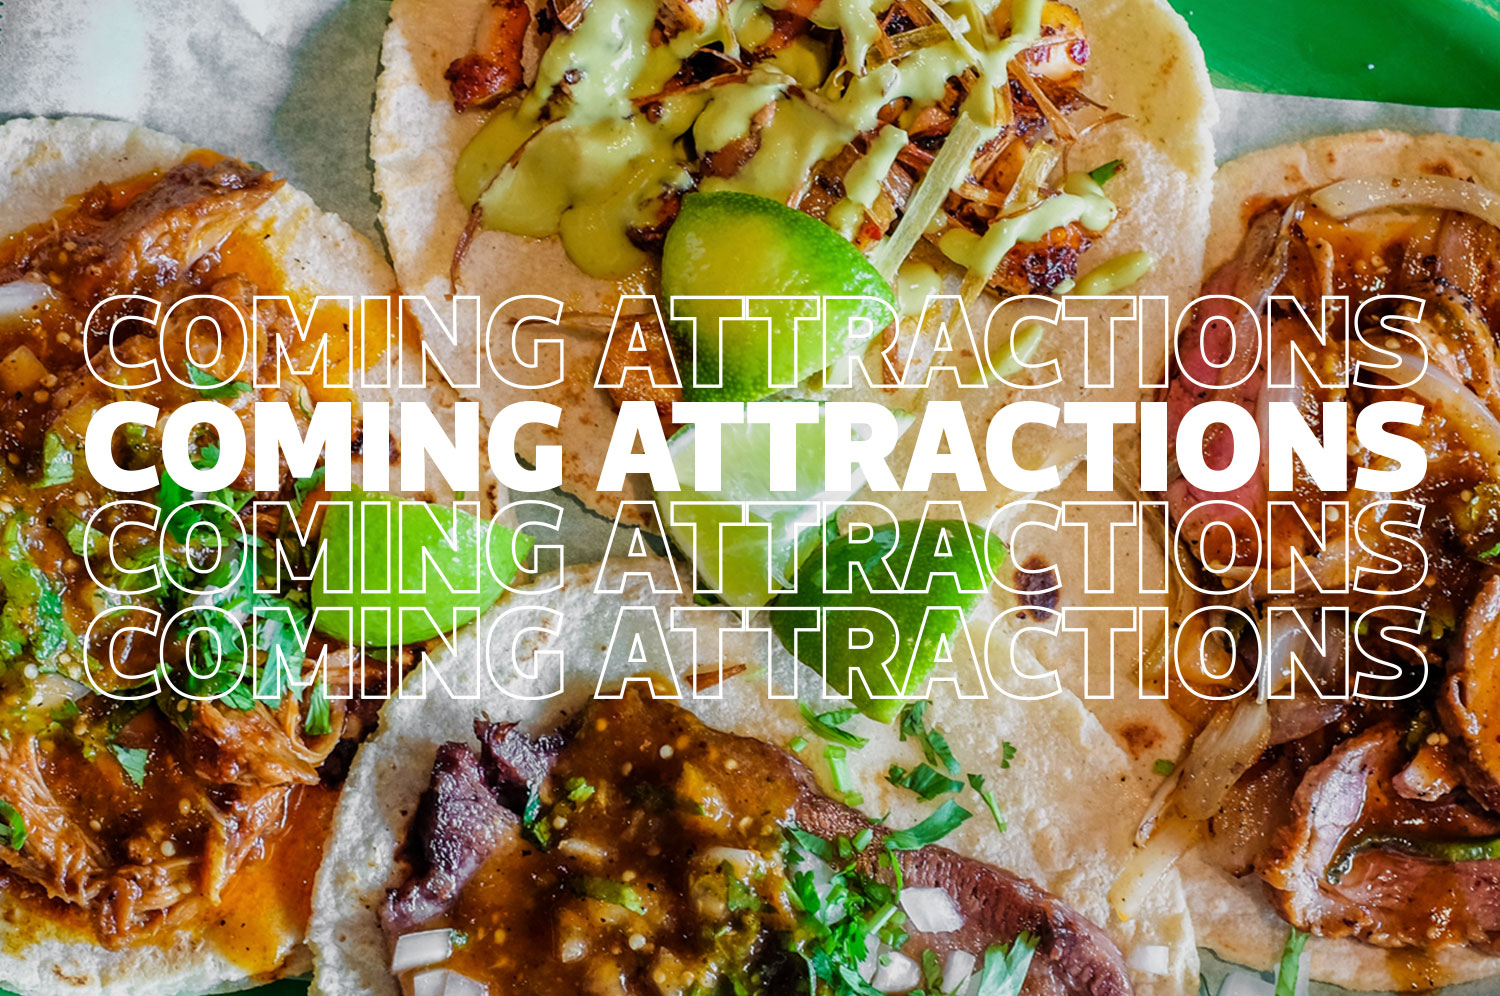 A “coming attractions” image with tacos in the background.